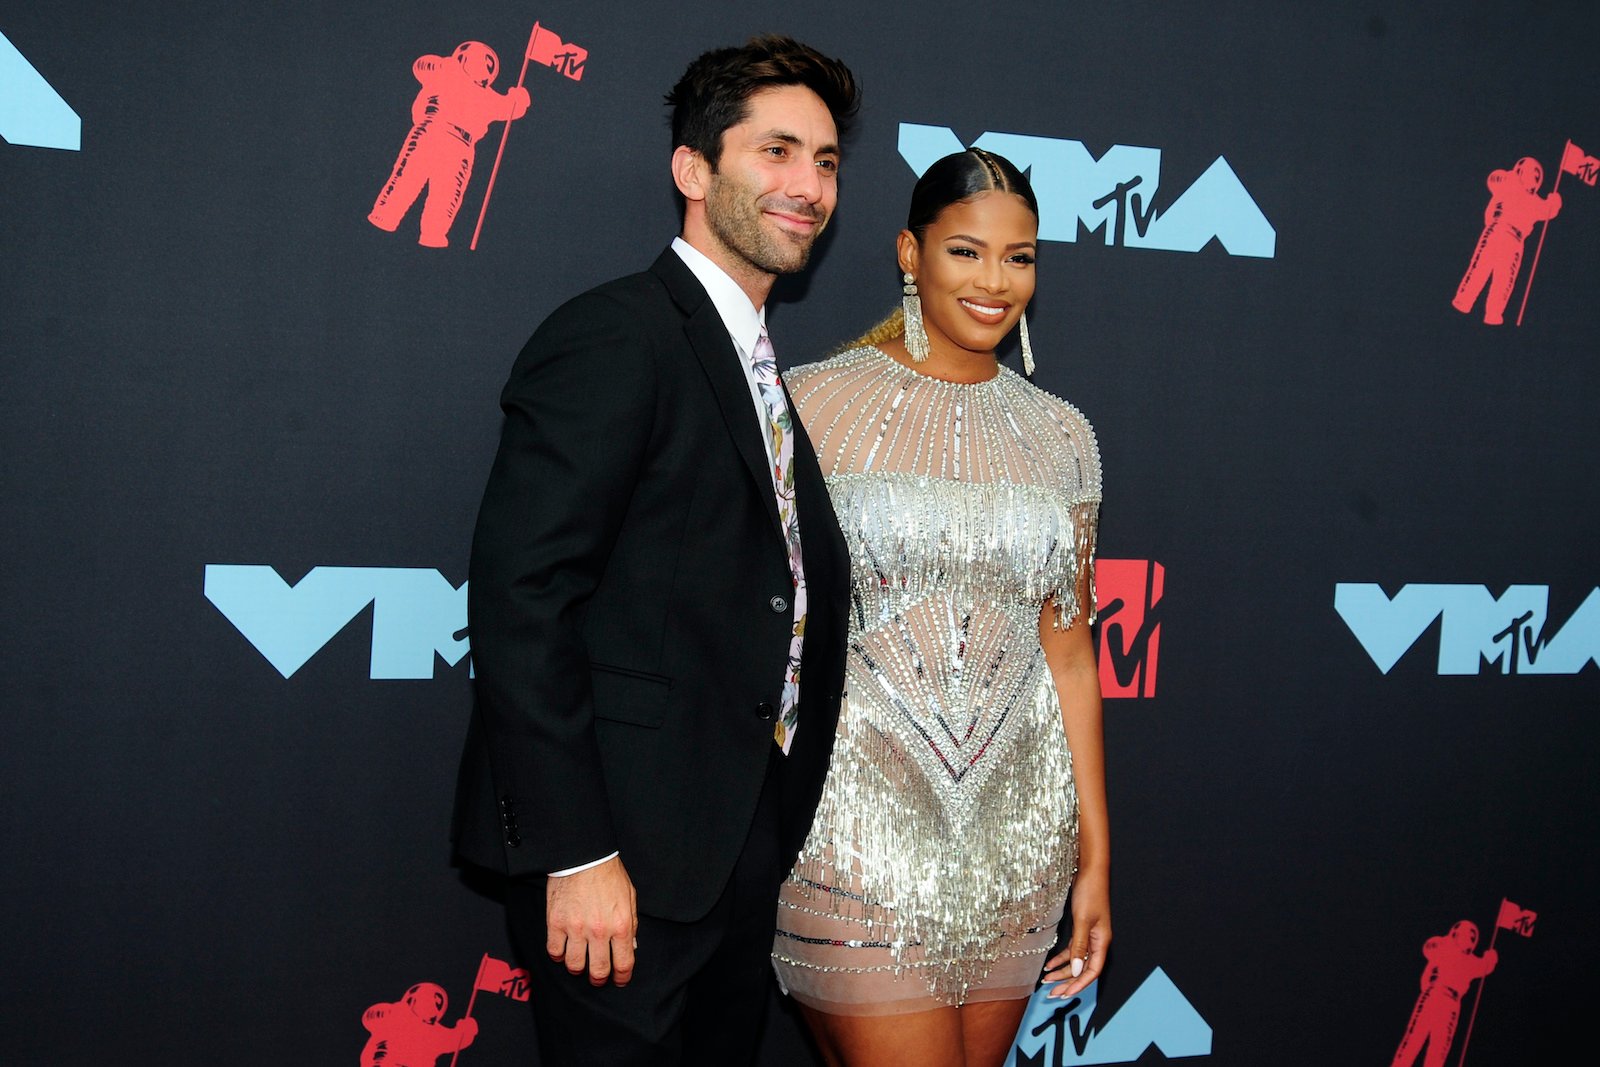 Nev Schulman and Kamie Crawford, hosts of 'Catfish: The TV Show' attended an awards show in 2019 and smiled for cameras